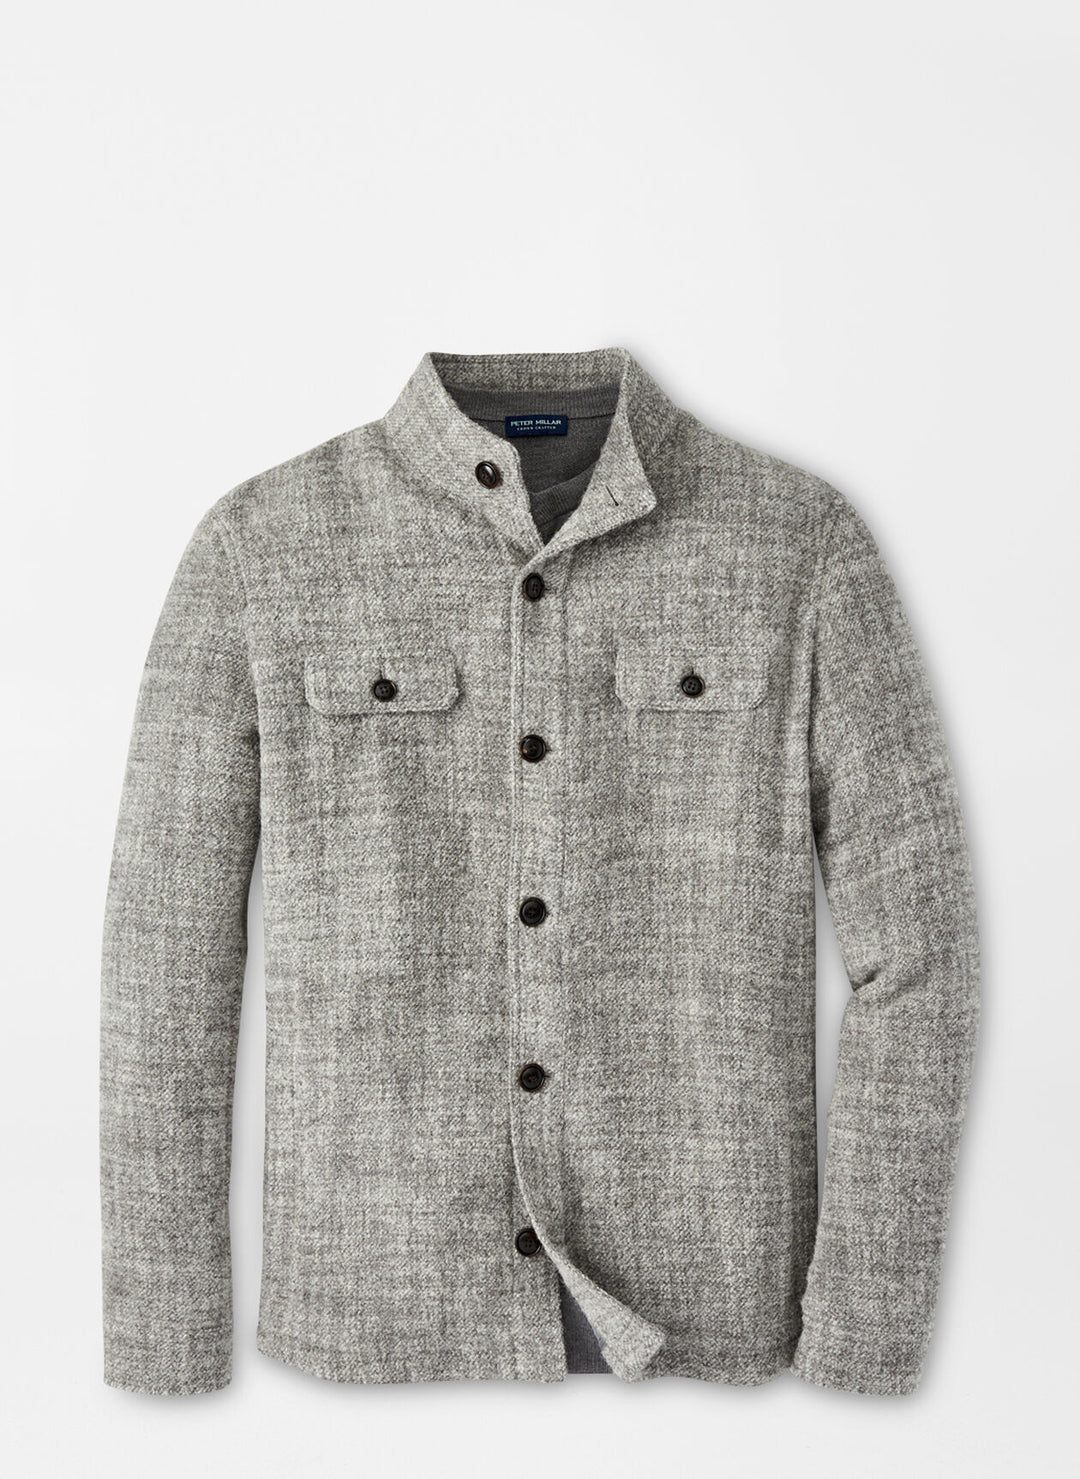 Peter Millar Stable Shirt Jacket In Gale Grey